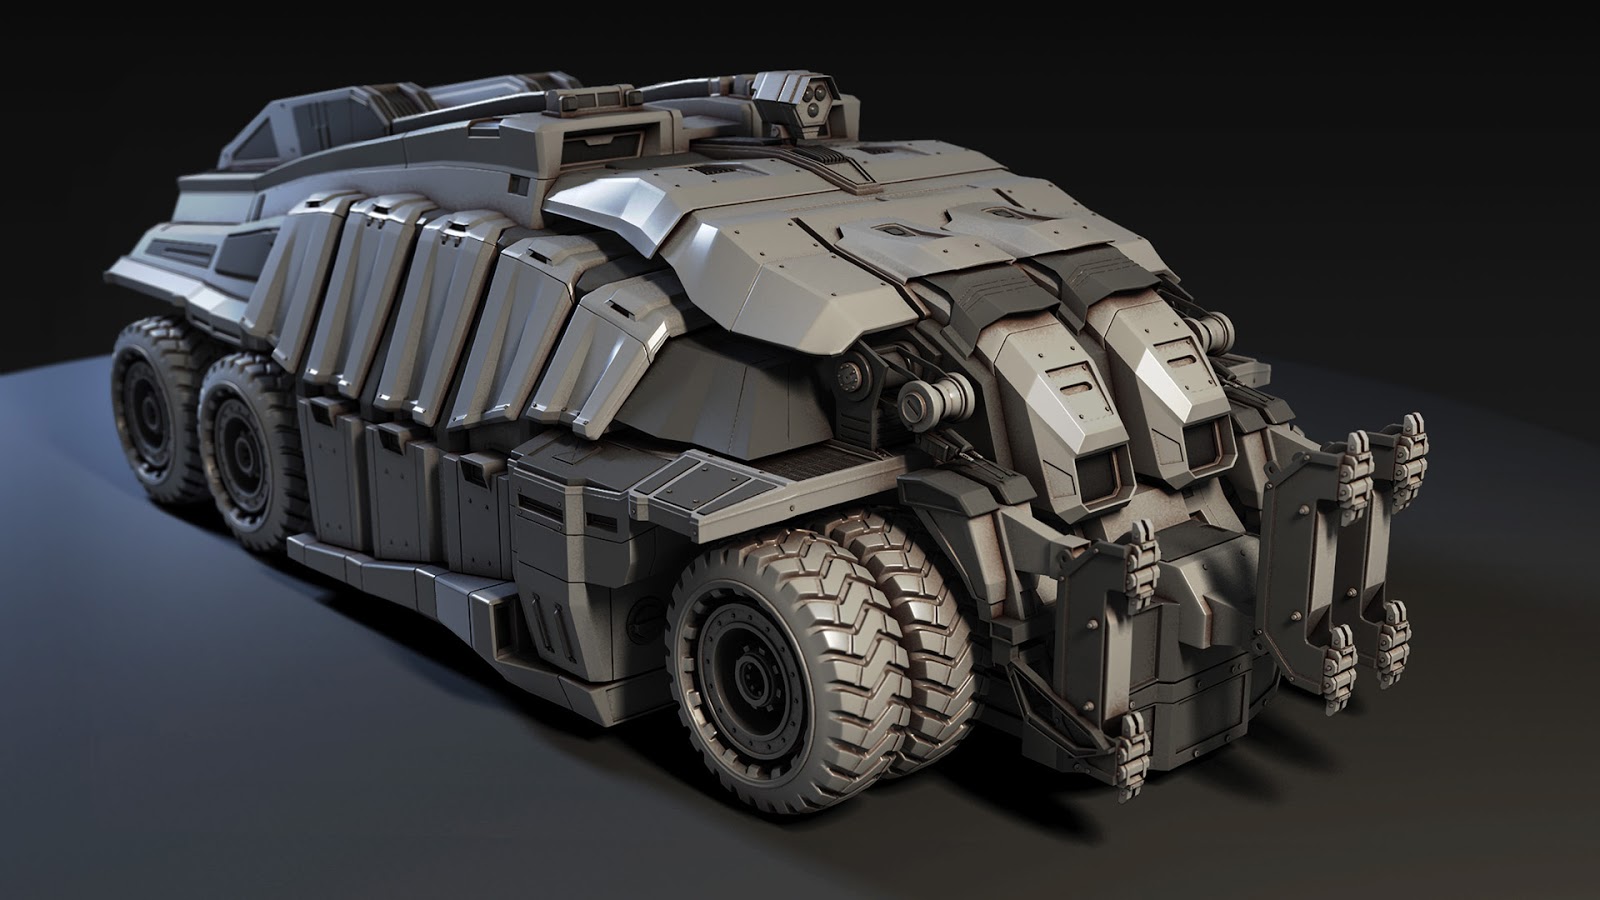 A world of collapse: SciFi vehicle